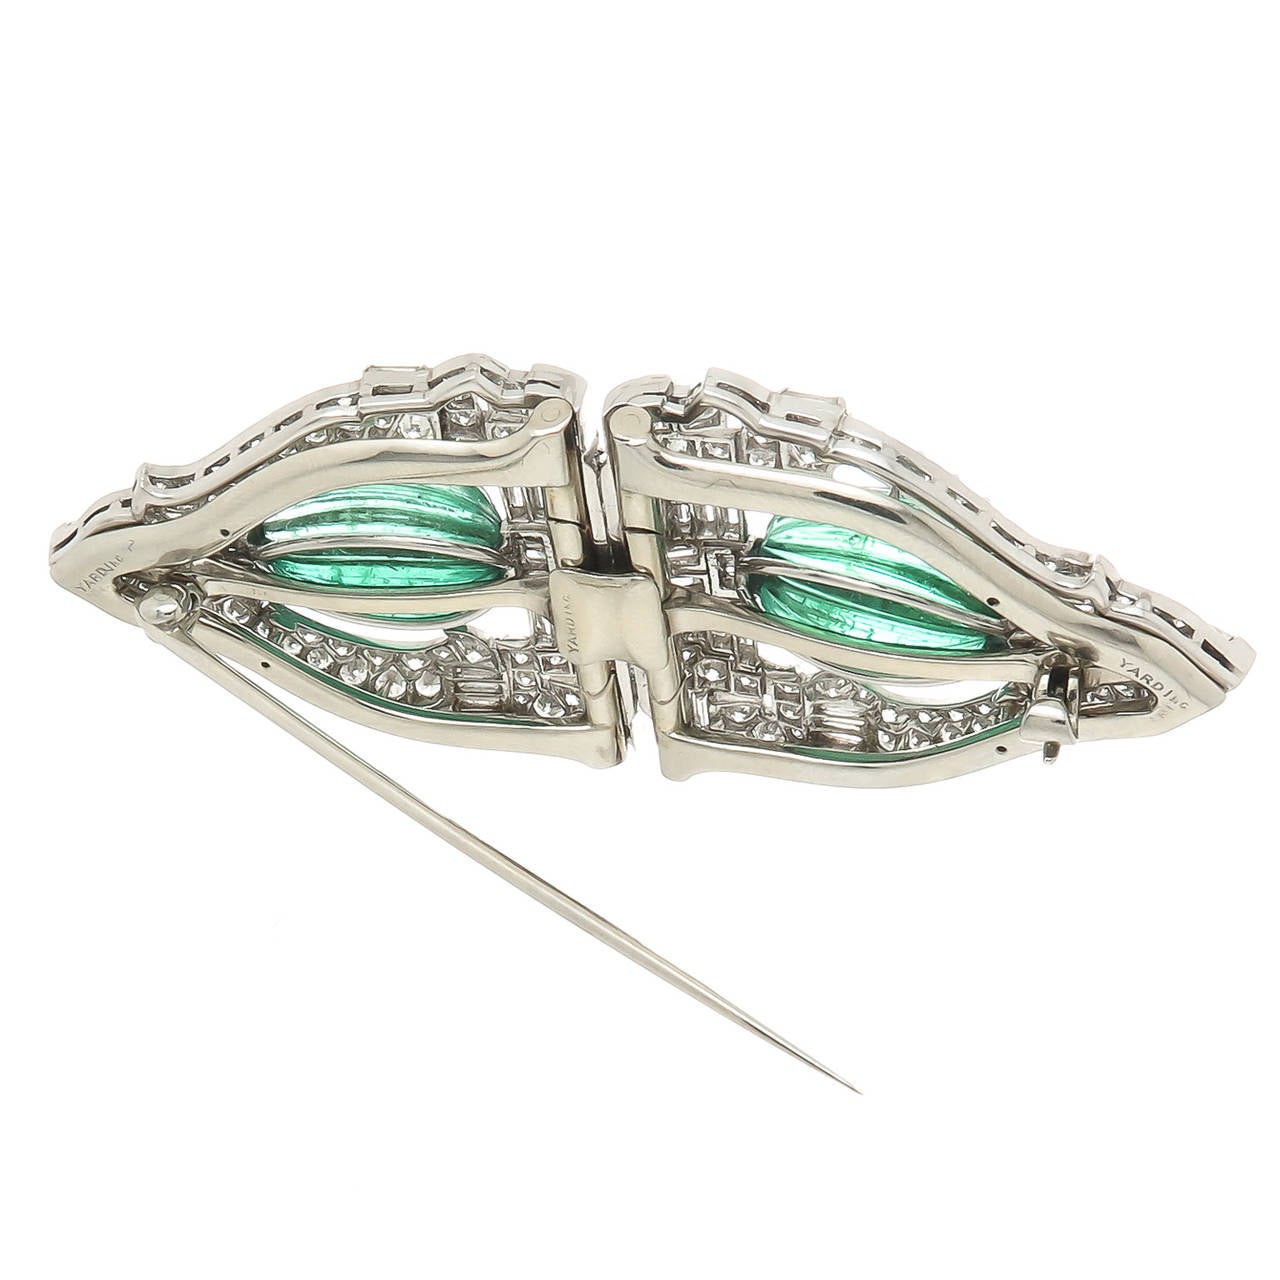 Circa 1930s Dress Clips By Raymond Yard, Platinum, Round, Marquise and Baguette Diamonds totaling 6 Carats. Further set with 2 Oval Ribbed cut Emeralds. totaling approximately 12 Carats. This Piece has its original Backing to be worn as a single